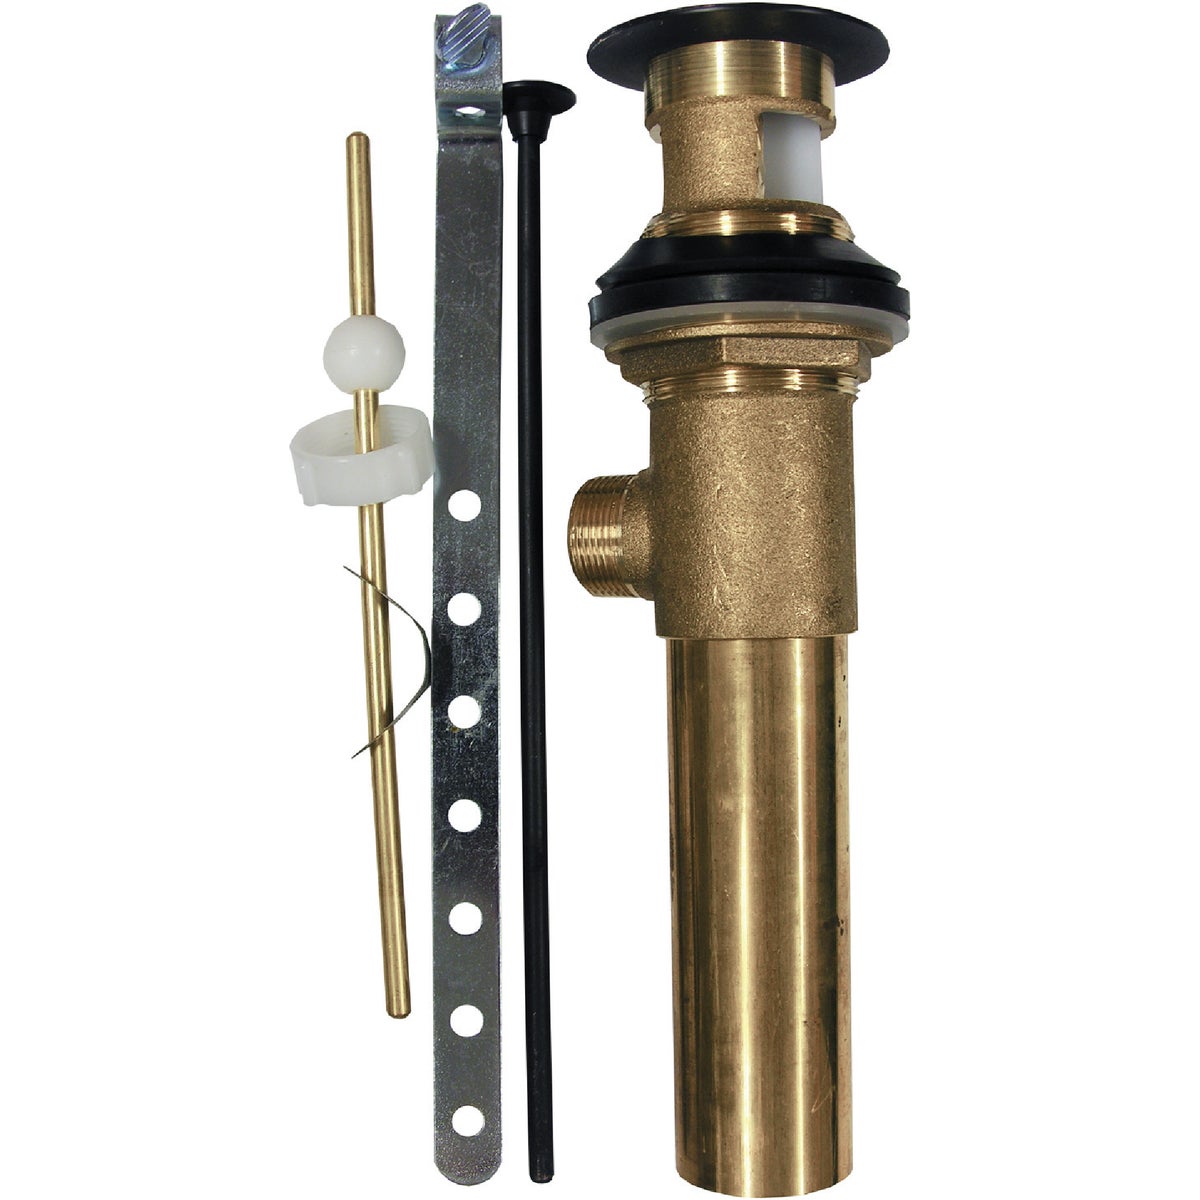 Lasco 1-1/4 In. Oil-Rubbed Bronze Brass Pop-Up Assembly